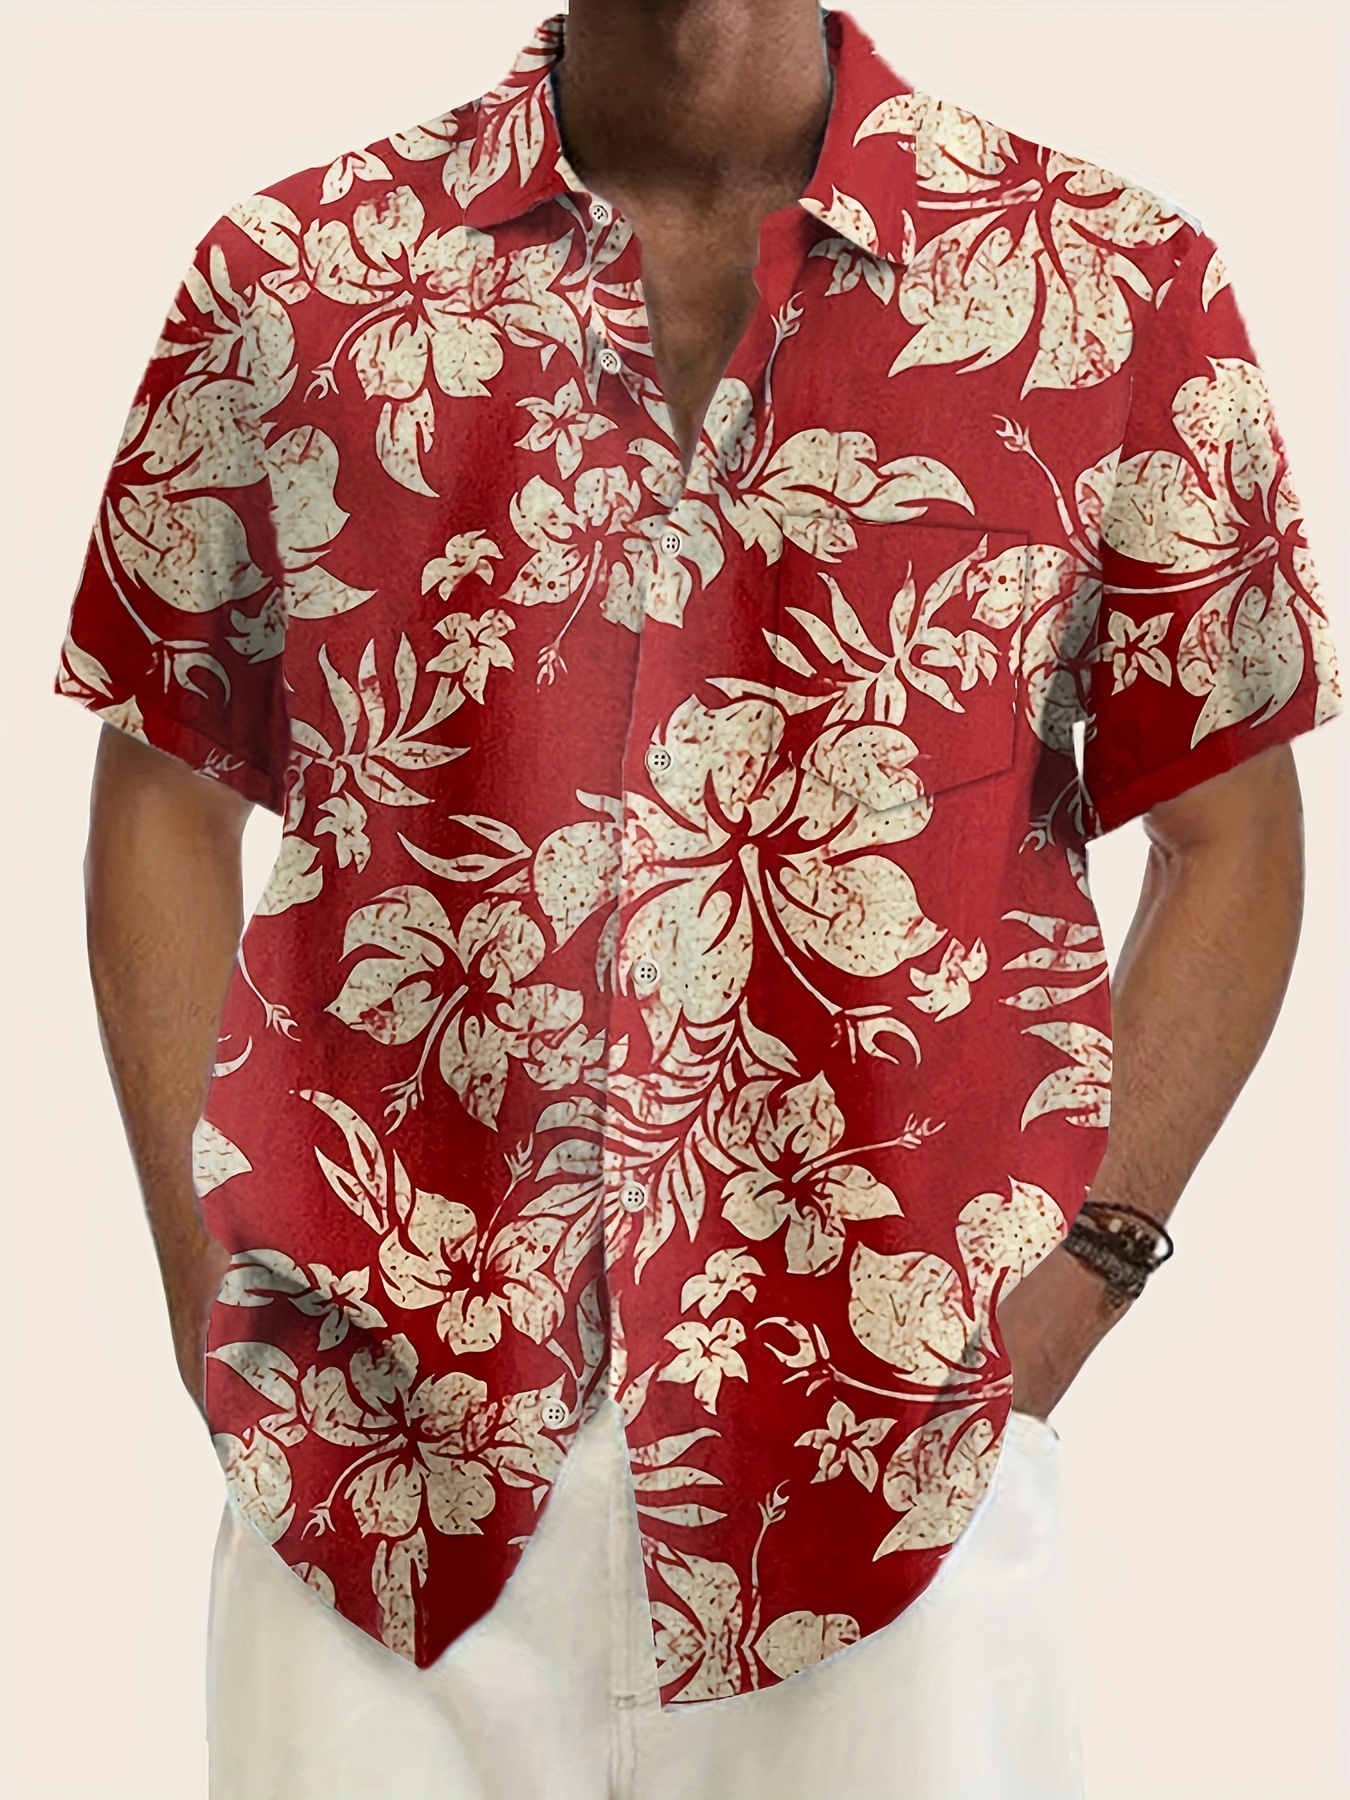 Plus Size Men's Hawaiian Shirts for Beach, Retro Floral Printed Short Sleeve Aloha Shirts, Oversized Casual Loose, Red and White Hibiscus Shirt